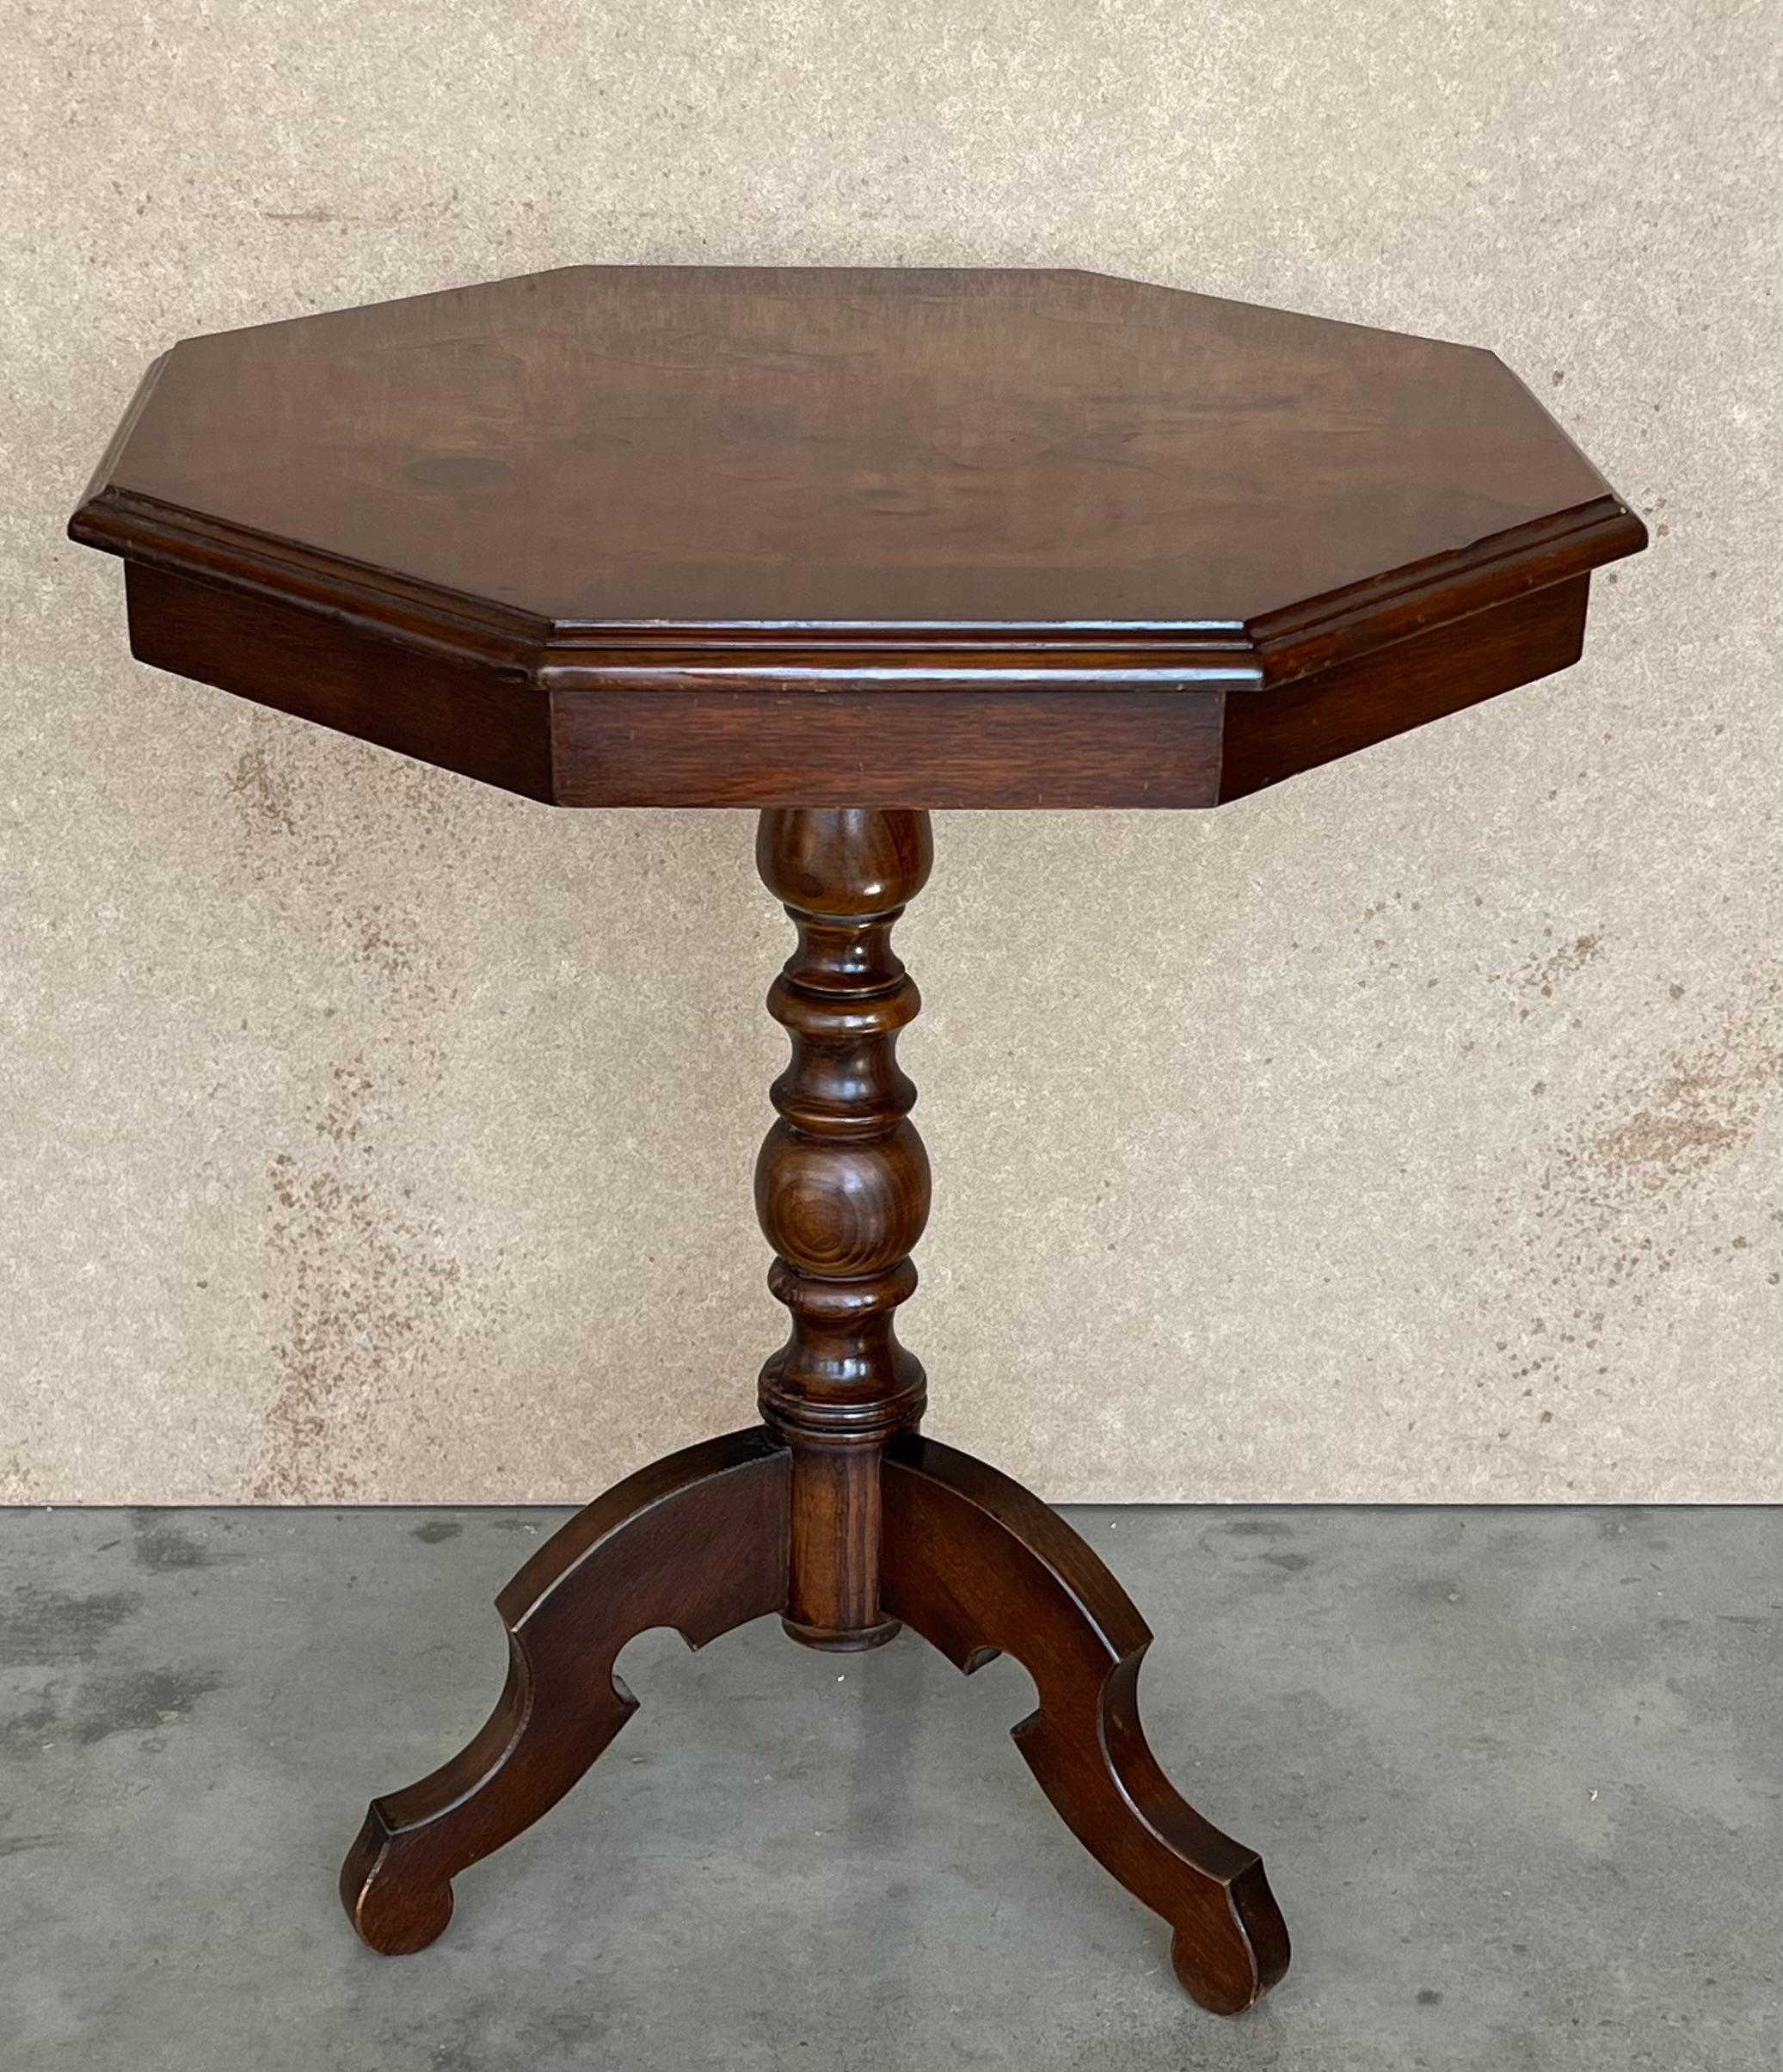 English tea table is an original furniture piece realized at the end of the 19th century by English manufacture. This octagonal-shaped tea table has a veneered top in various root wood supported by a carved pedestal with three feet.